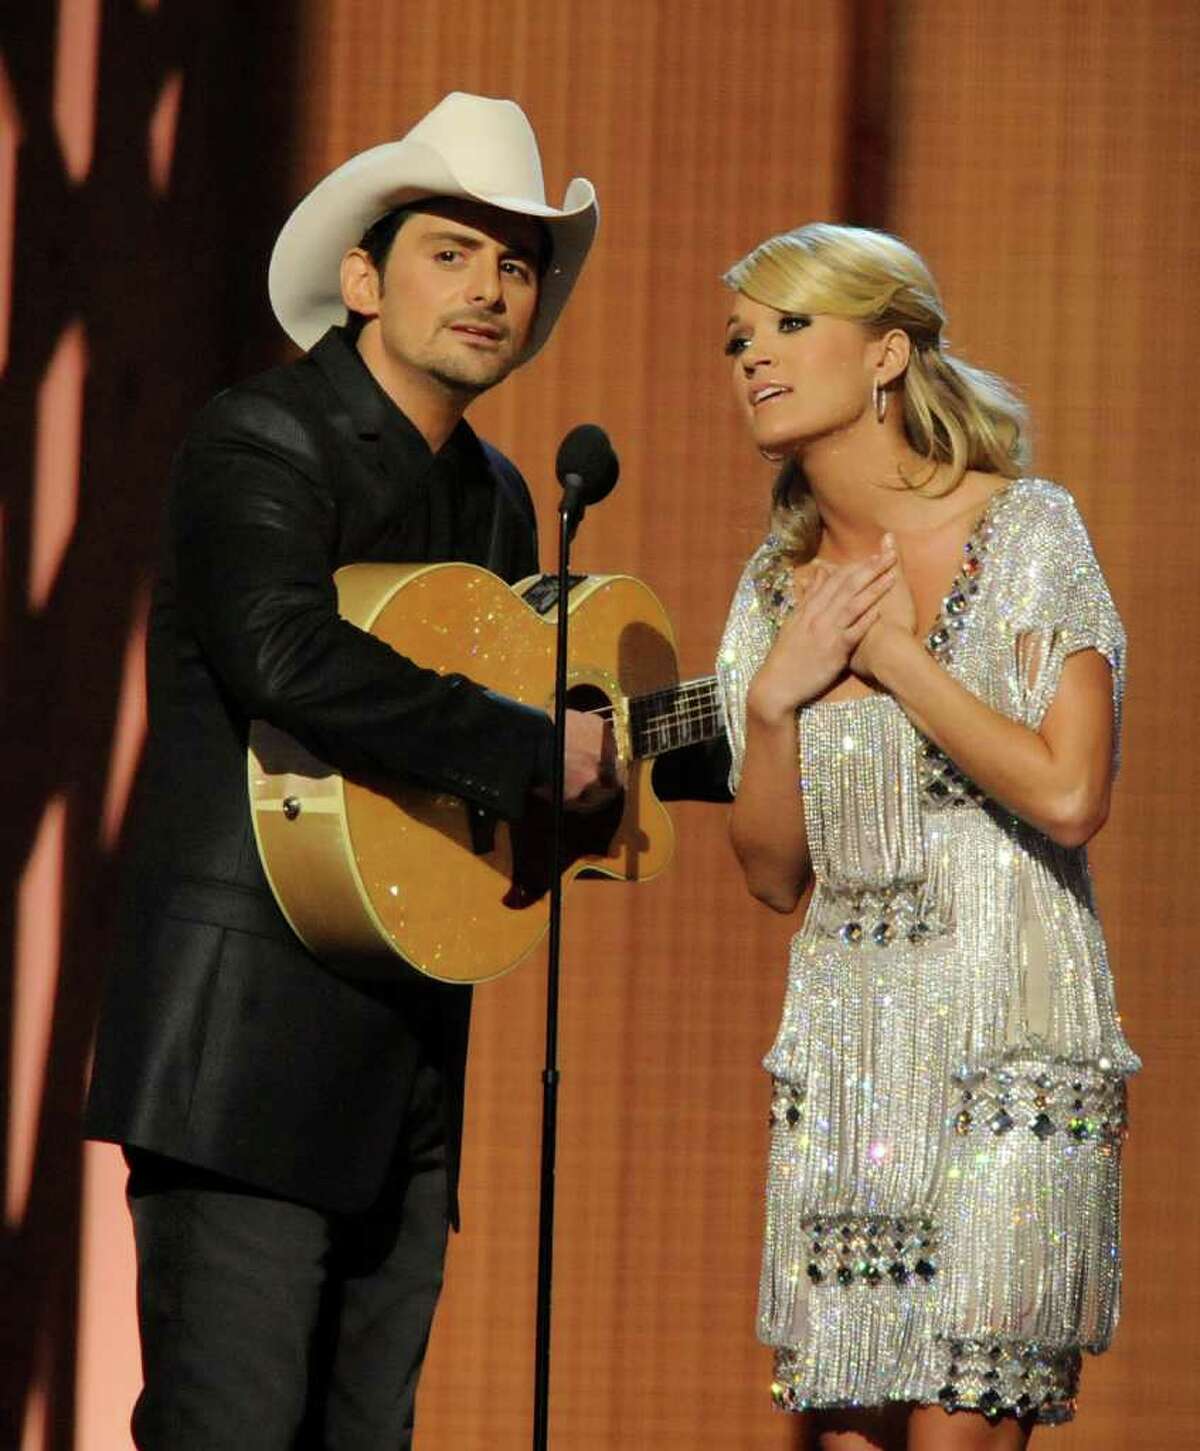 Carrie and Brad to host CMA Awards a 4th timeNASHVILLE, Tenn. (AP) -- Carrie Underwood and Brad Paisley will be back together again in November.They've been picked to host the Country Music Association Awards for a fourth straight year. The 45th annual awards will be aired live Nov. 9 from Nashville's Bridgestone Arena on ABC.Paisley is the reigning CMA entertainer of the year. Paisley and Underwood have won 19 CMA awards between them.As Paisley notes in a news release announcing their return, they've achieved a comic chemistry over the years with Underwood's class balancing "my non-class act. I'll try my best to not mess it up."The CMA Awards are the most-watched country awards show. More than 16 million viewers tuned in last year. [Brad Paisley and Carrie Underwood perform at the CMAs in Nashville on Nov. 11, 2009]